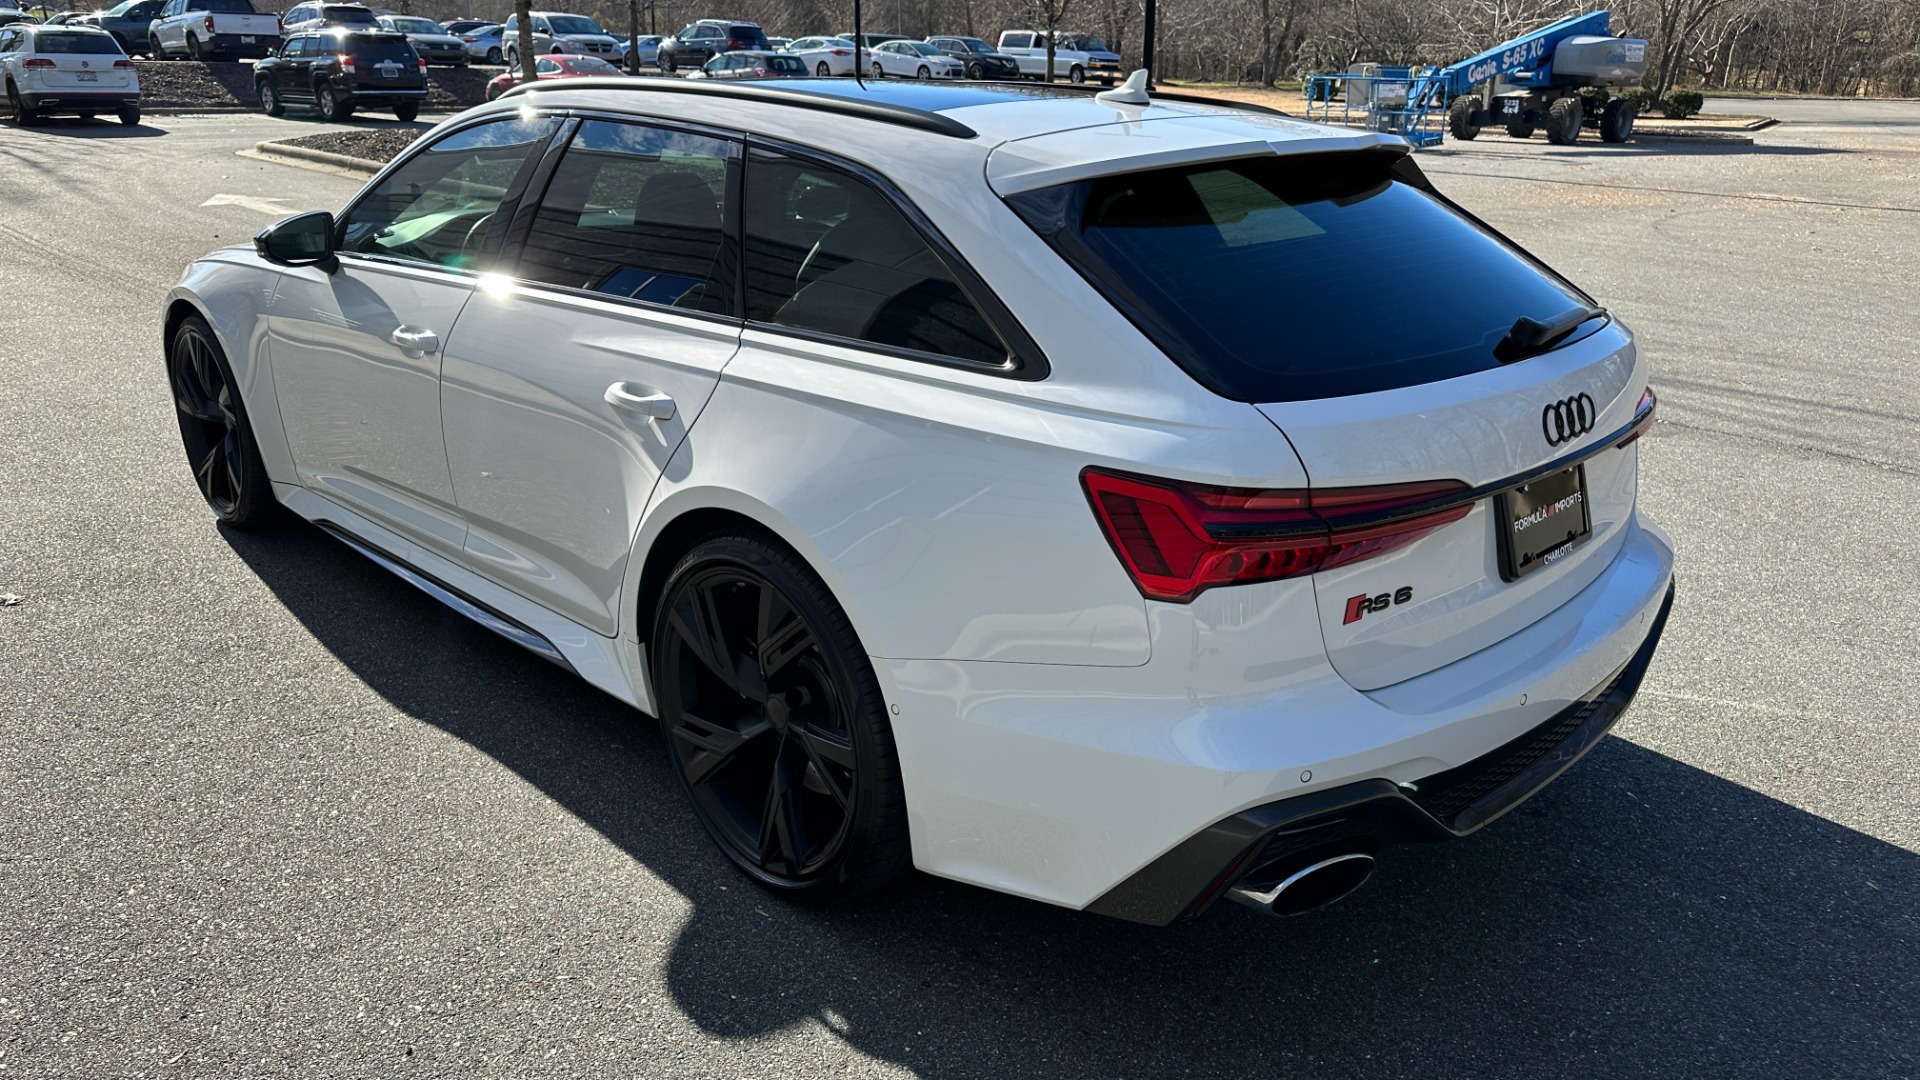 Used 2022 Audi RS 6 Avant 4.0T QUATTRO AVANT / B&O SOUND / EXECUTIVE / CARBON OPTIC PKG for sale $107,500 at Formula Imports in Charlotte NC 28227 7